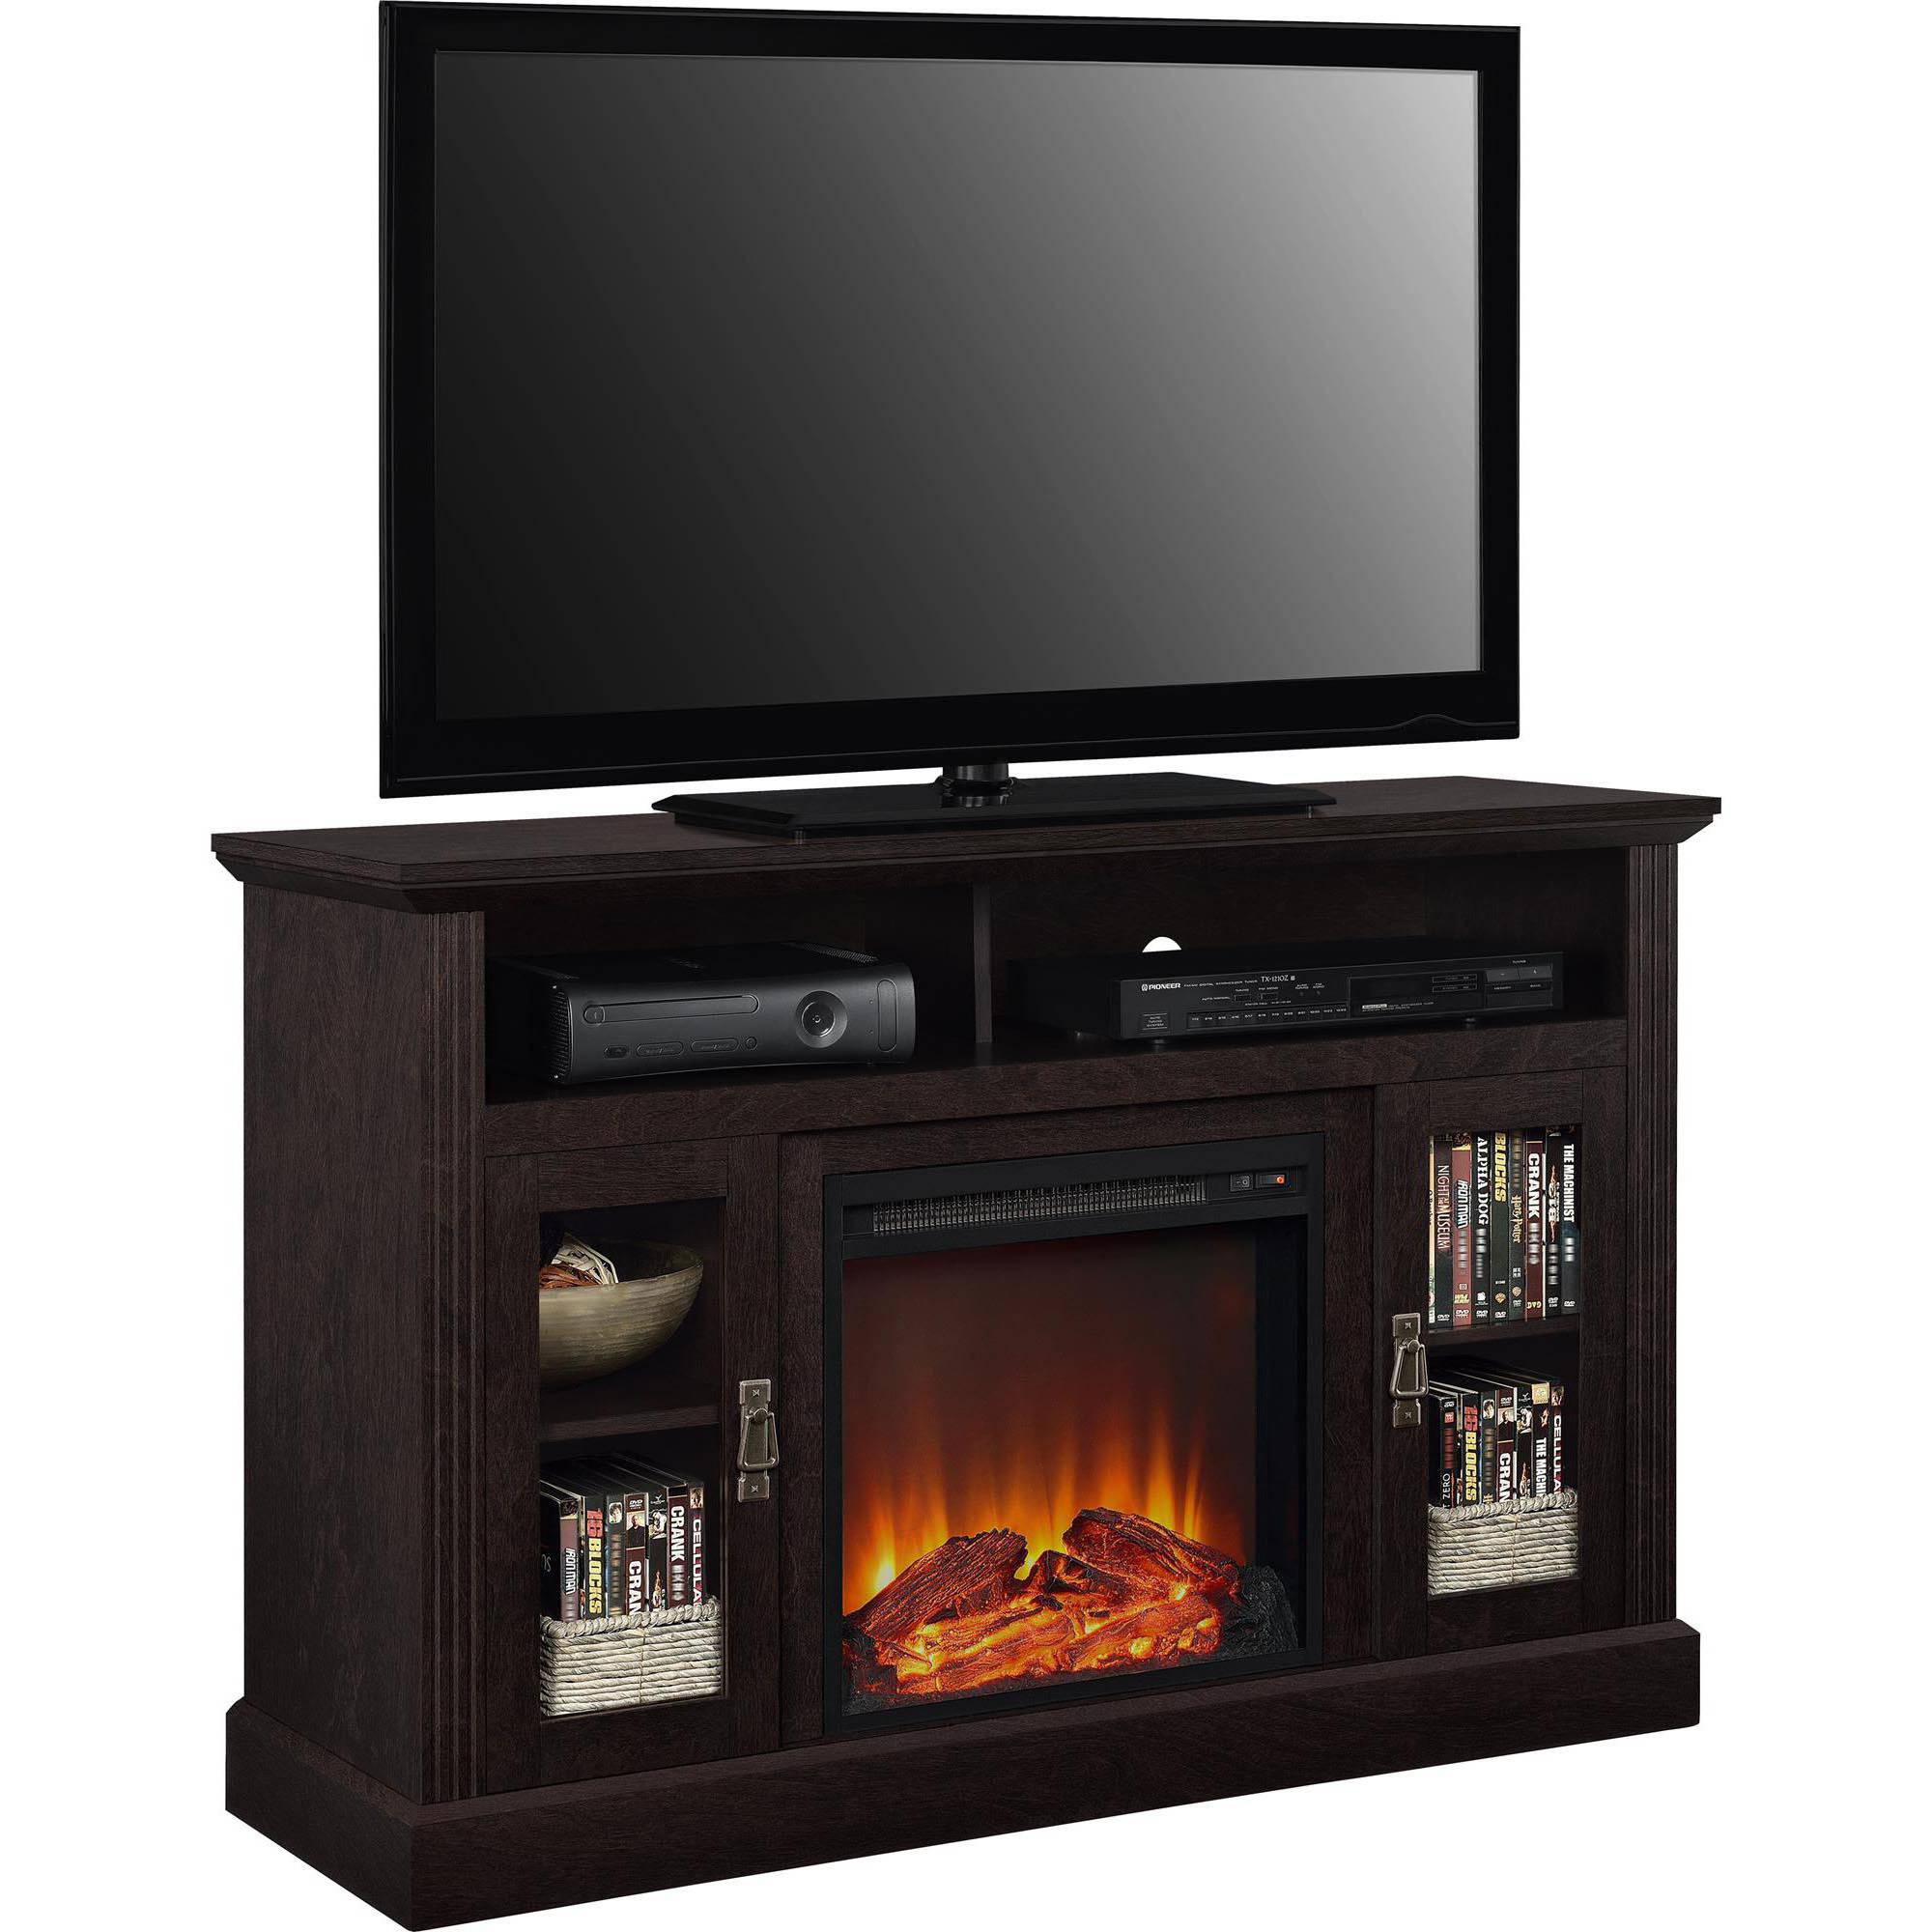 Tv Stand with Fireplace 65 Inch Unique Kostlich Home Depot Fireplace Tv Stand Lumina Big Corner